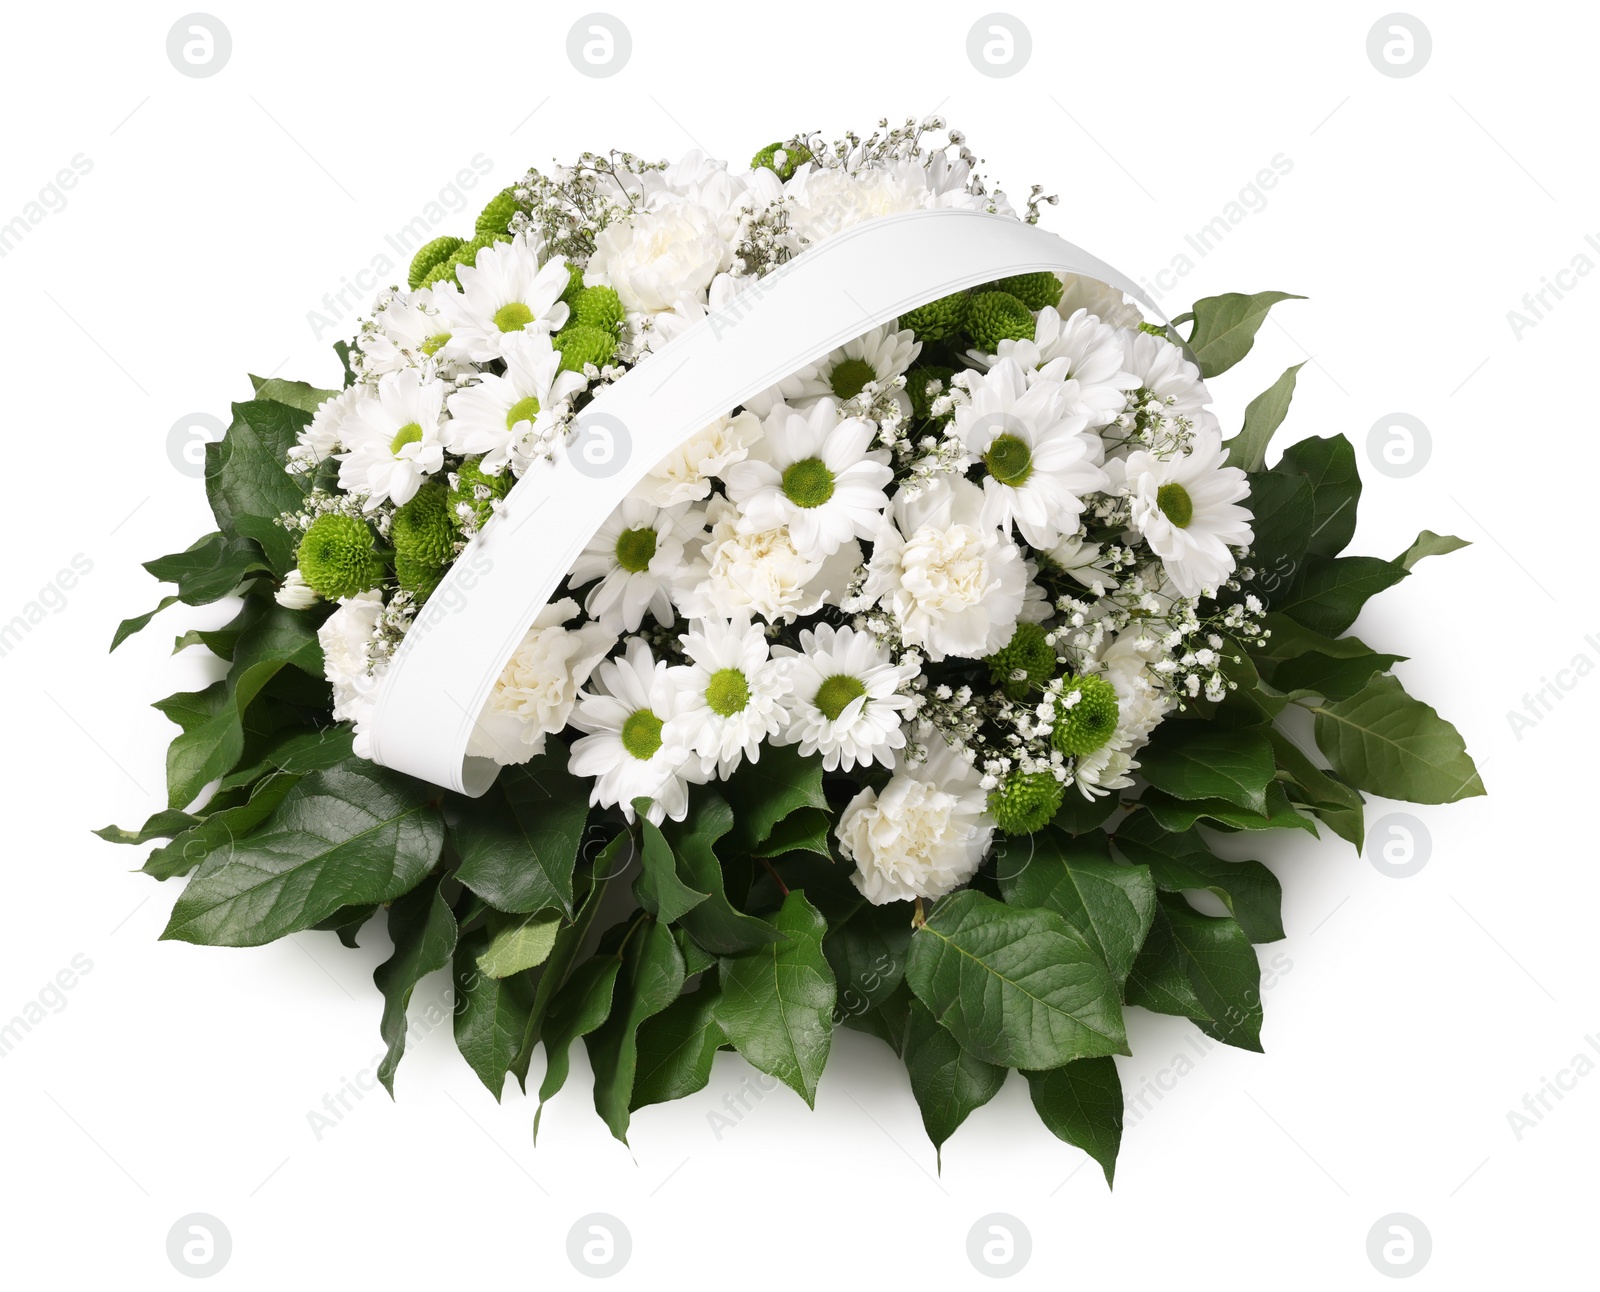 Photo of Funeral wreath of flowers with ribbon on white background